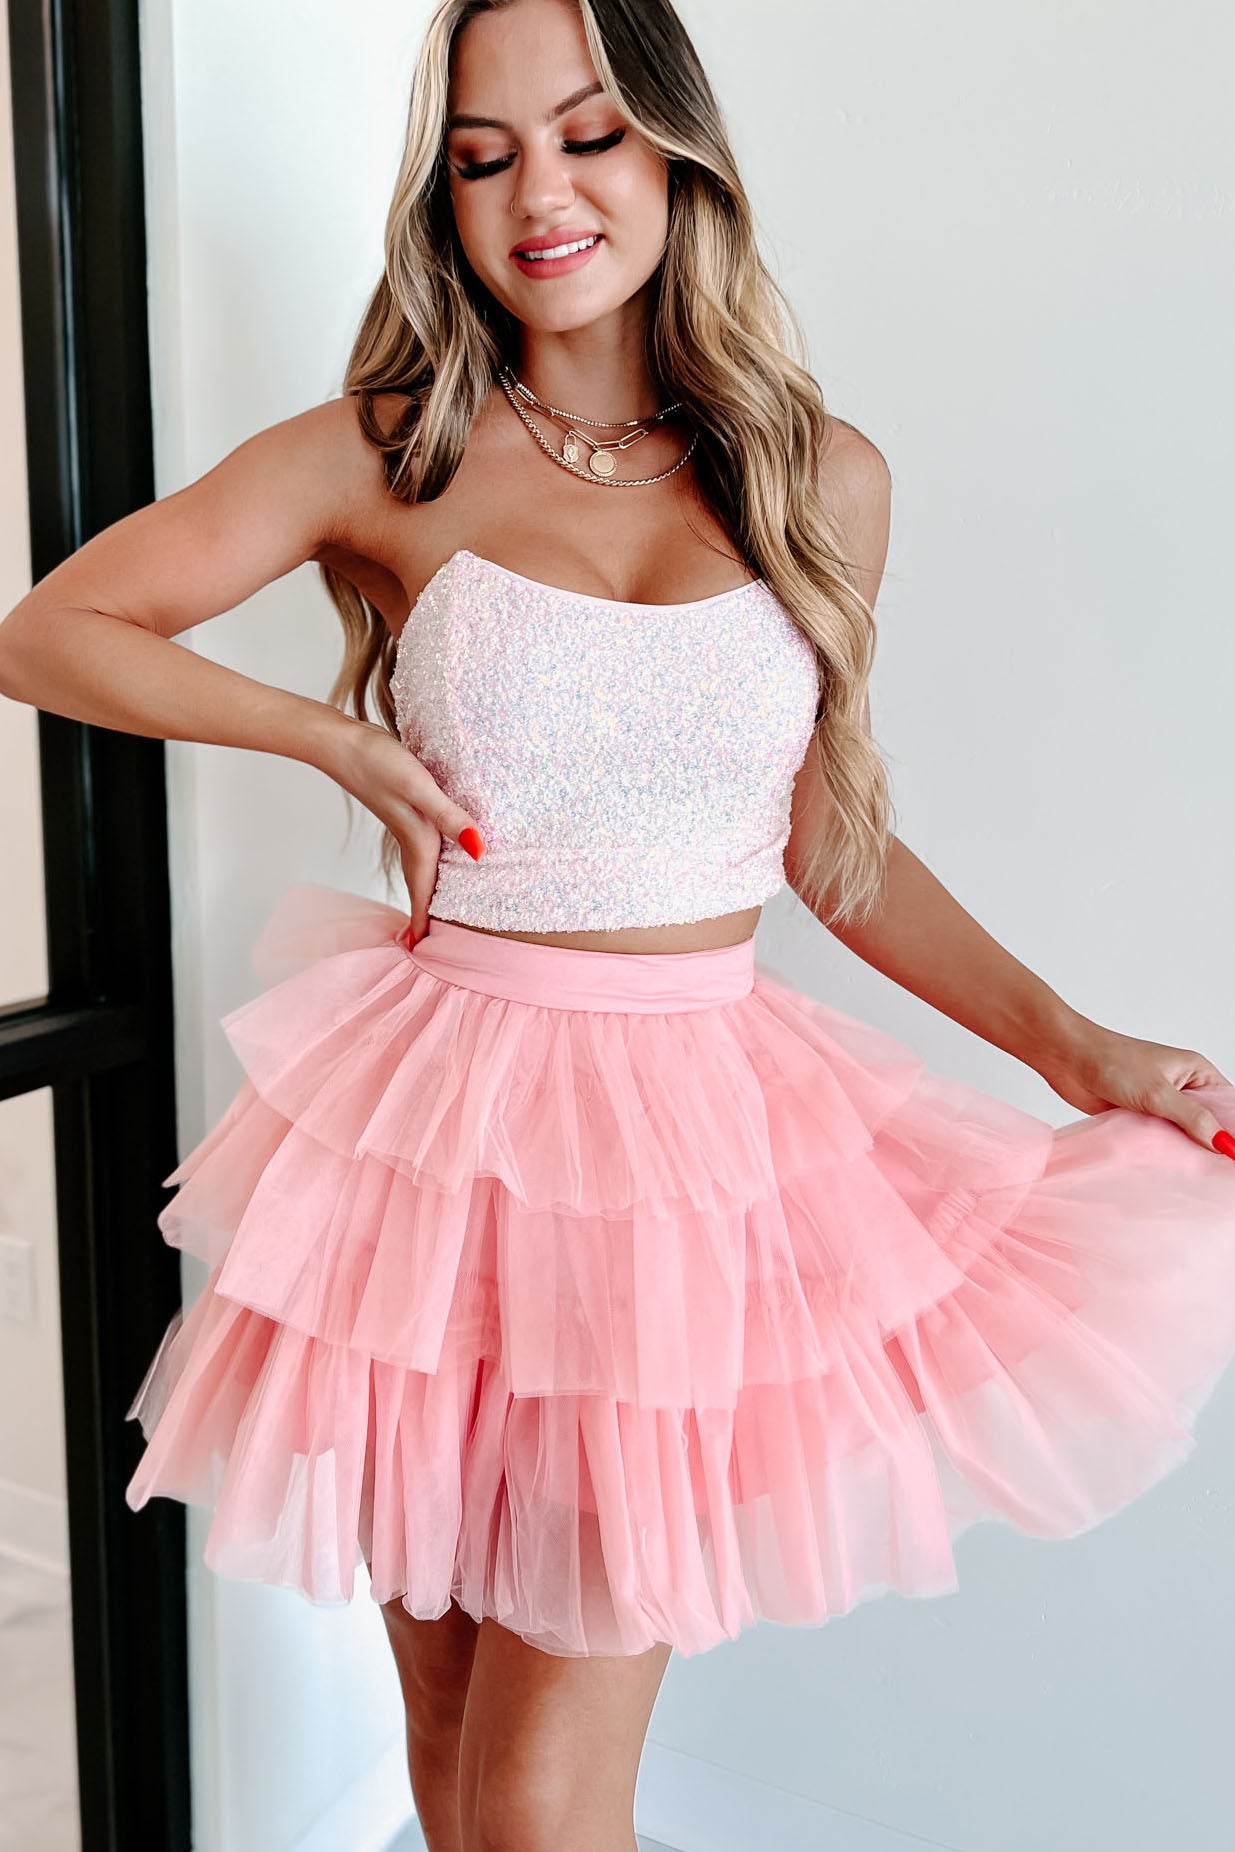 Undeniably Sparkly Sequin Crop Top (Pink) - NanaMacs